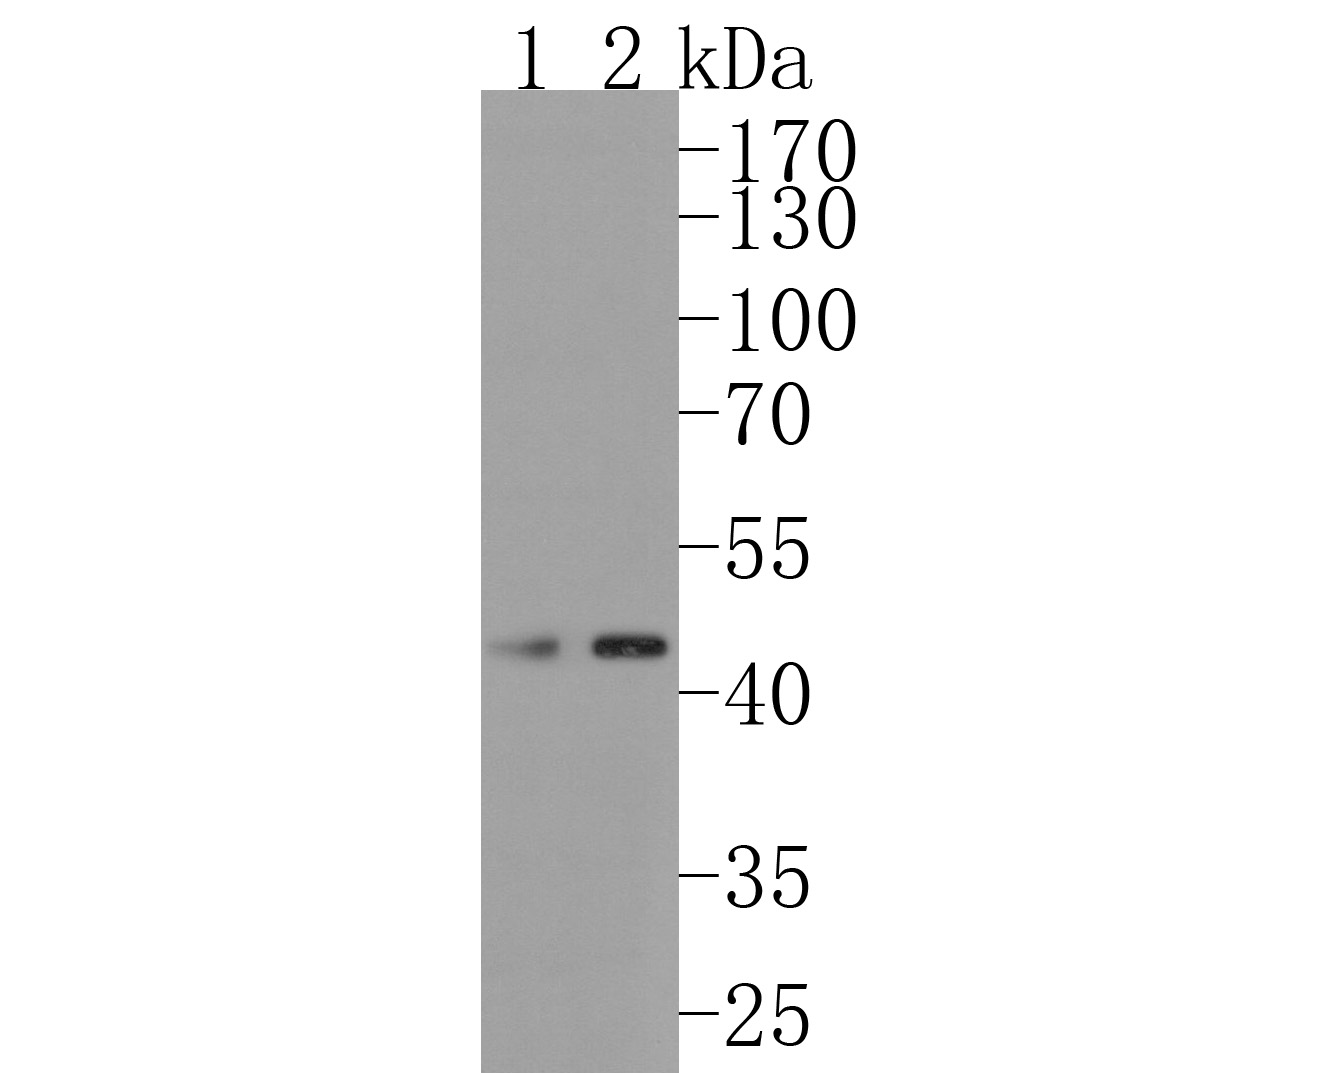 Western blot analysis of FDFT1 on different lysates. Proteins were transferred to a PVDF membrane and blocked with 5% NFDM/TBST for 1 hour at room temperature. The primary antibody (HA720048, 1/500) was used in 5% NFDM/TBST at room temperature for 2 hours. Goat Anti-Rabbit IgG - HRP Secondary Antibody (HA1001) at 1:200,000 dilution was used for 1 hour at room temperature.<br />
Positive control: <br />
Lane 2: SH-SY5Y cell lysate<br />
Lane 1: Mouse brain tissue lysate